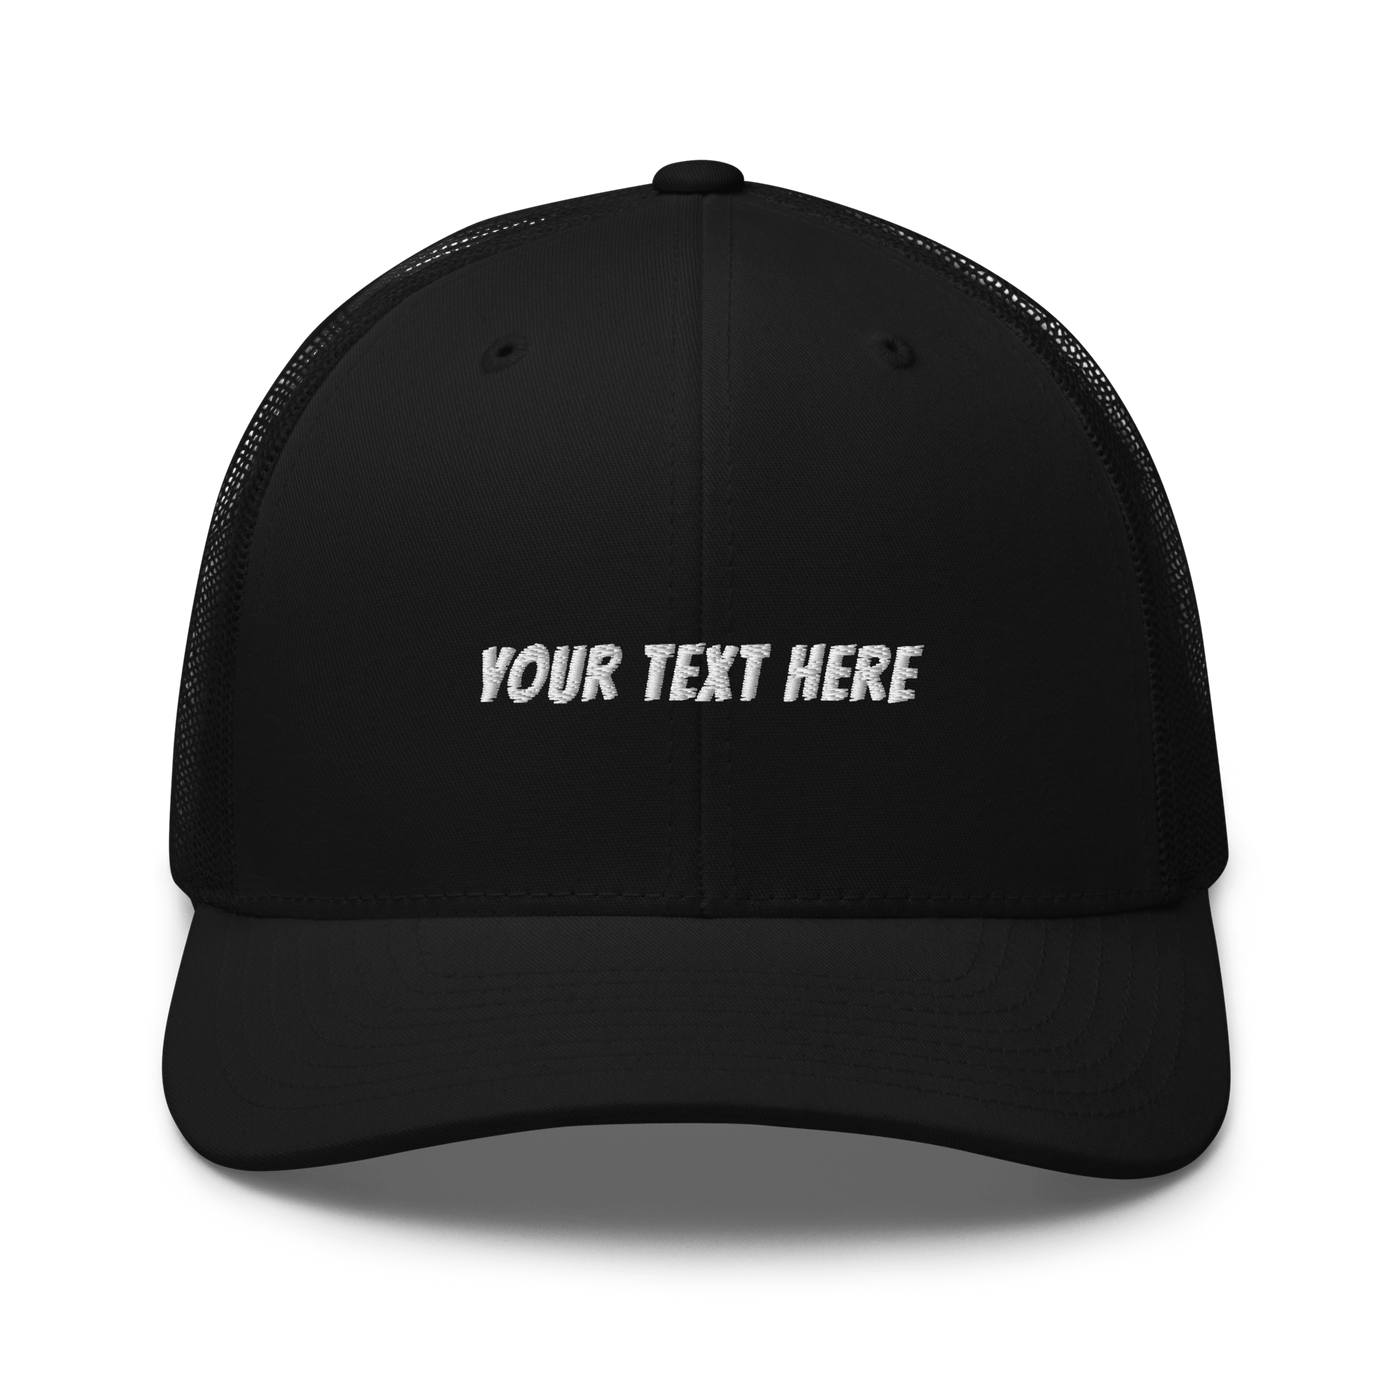 Customize Your Own Trucker Cap - Banger Font - Black - - Just Another Cap Store